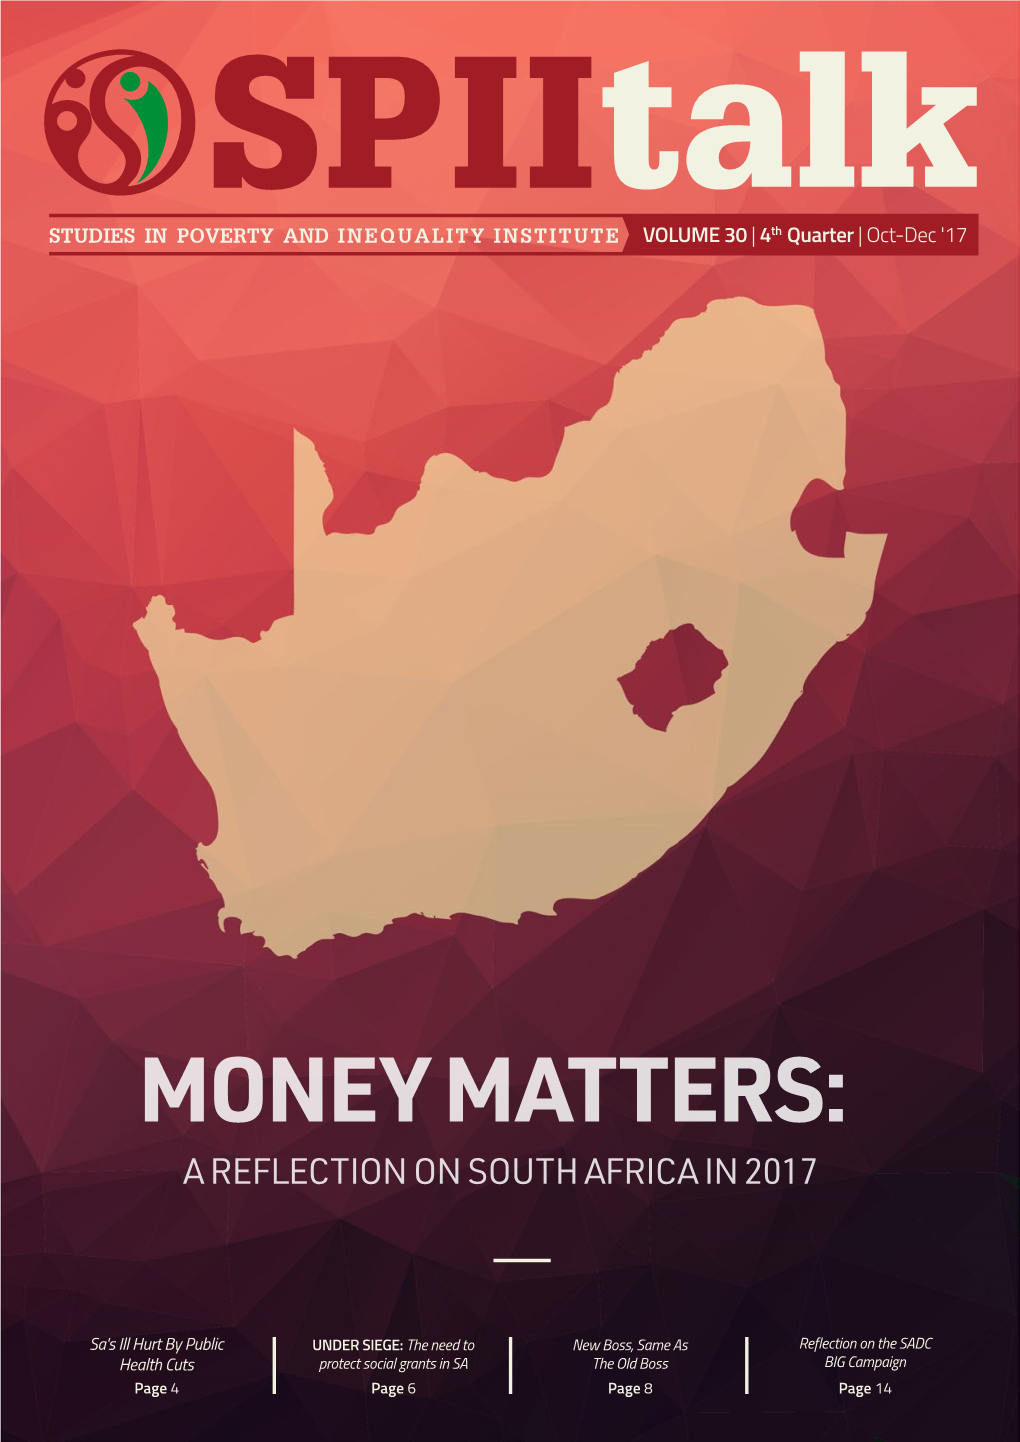 Money Matters: a Reflection on South Africa in 2017